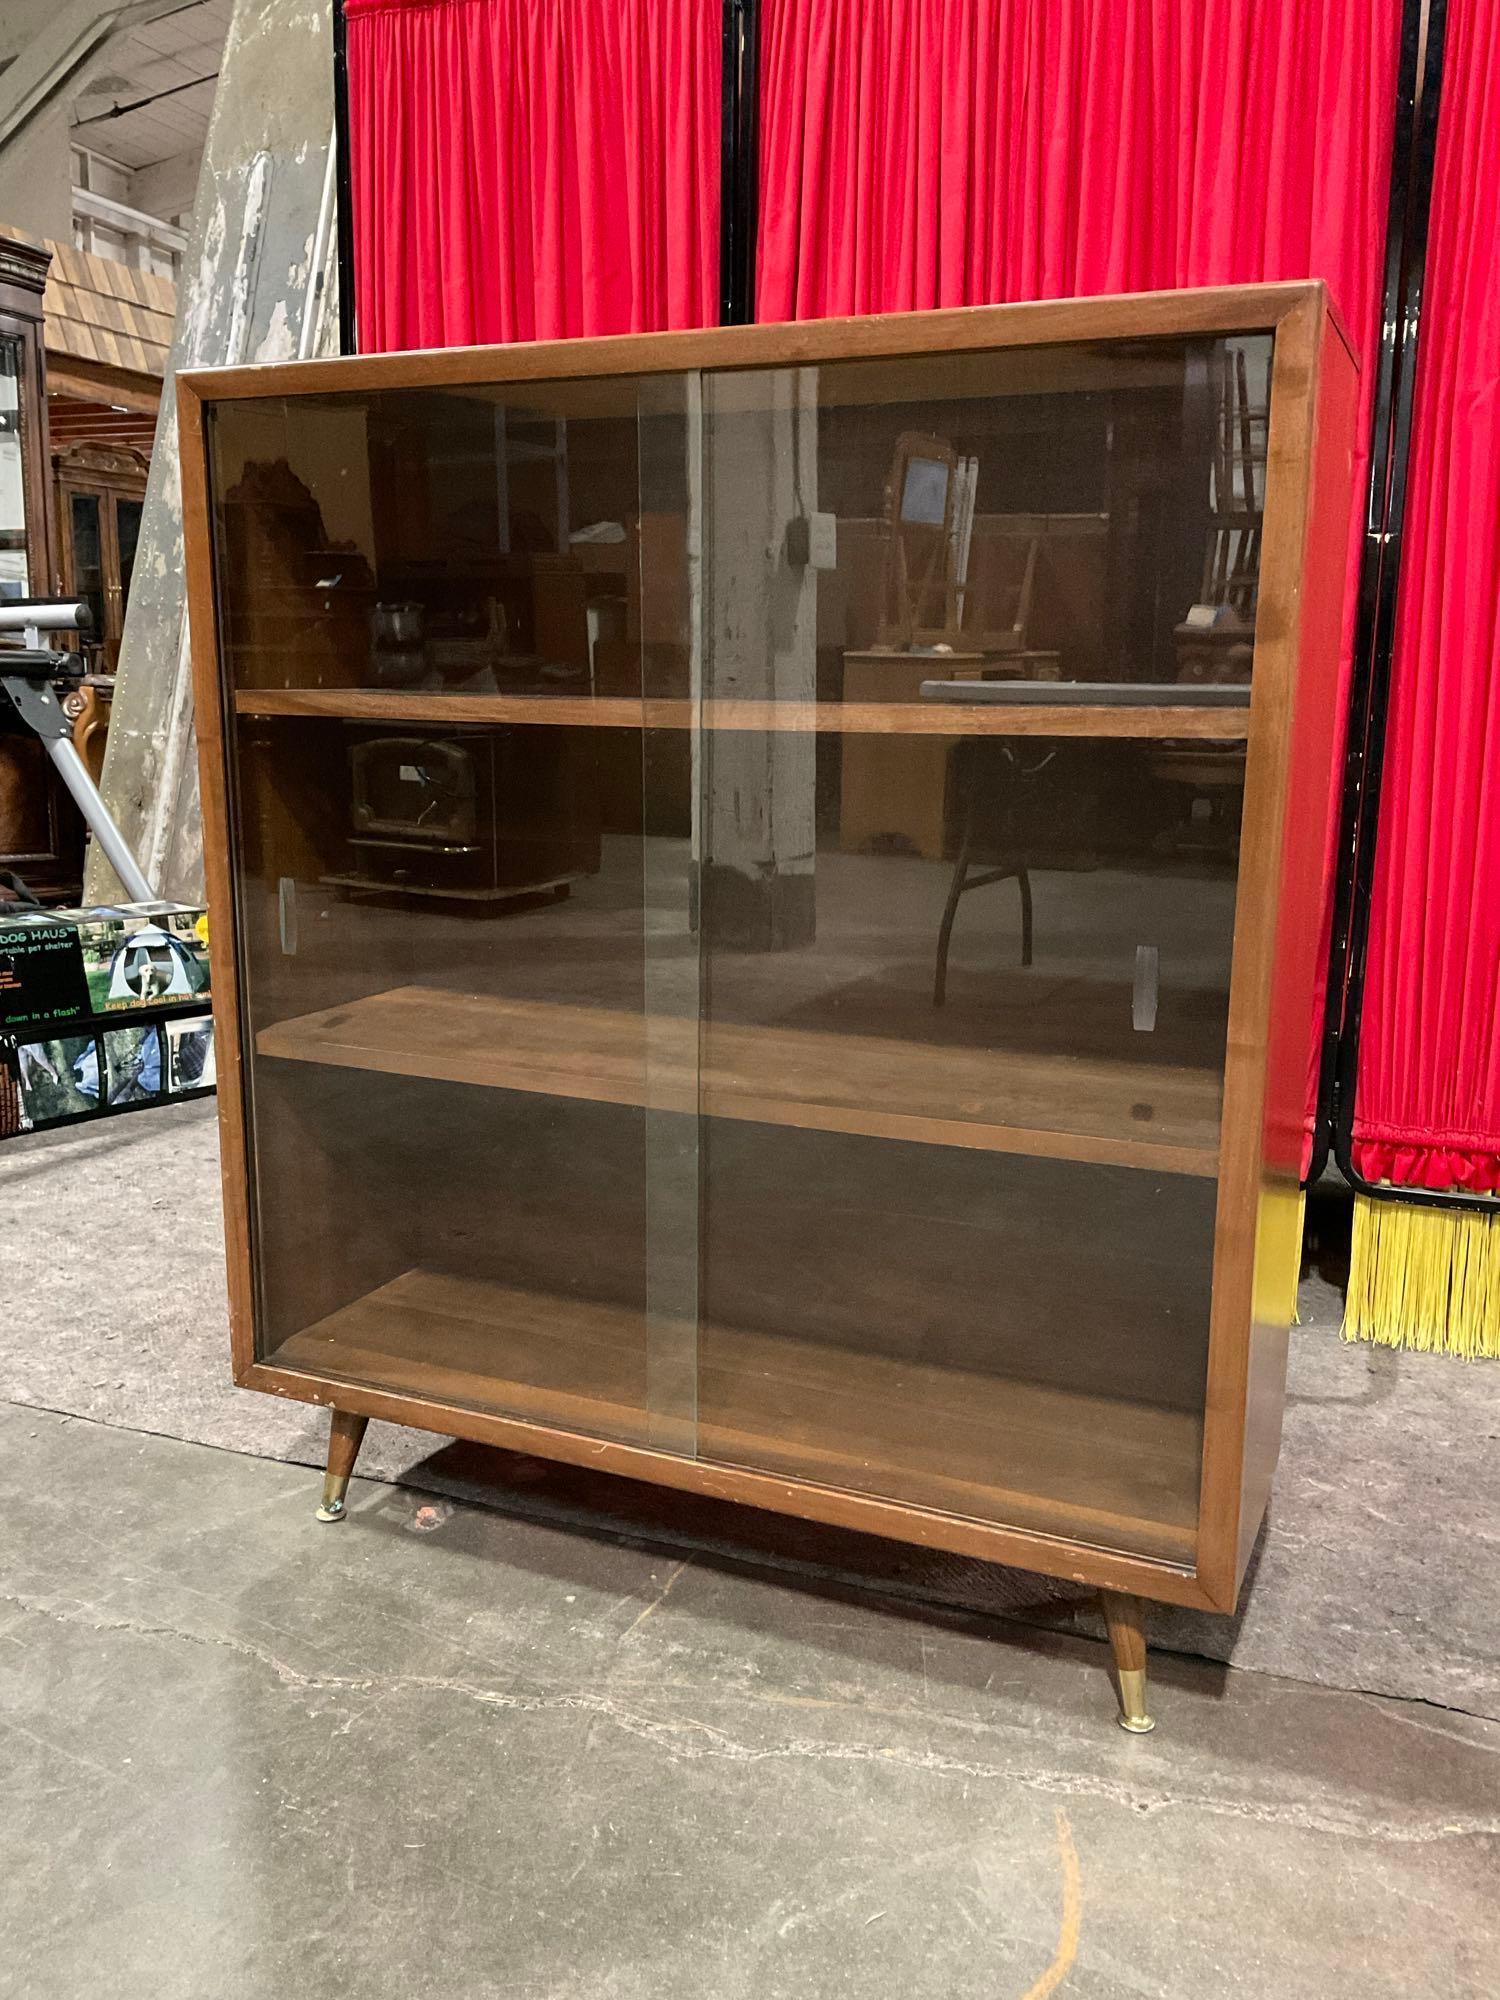 Vintage Mid-Century Modern Glass Fronted Wooden Cabinet w/ Sliding Doors & 3 Shelves. See pics.